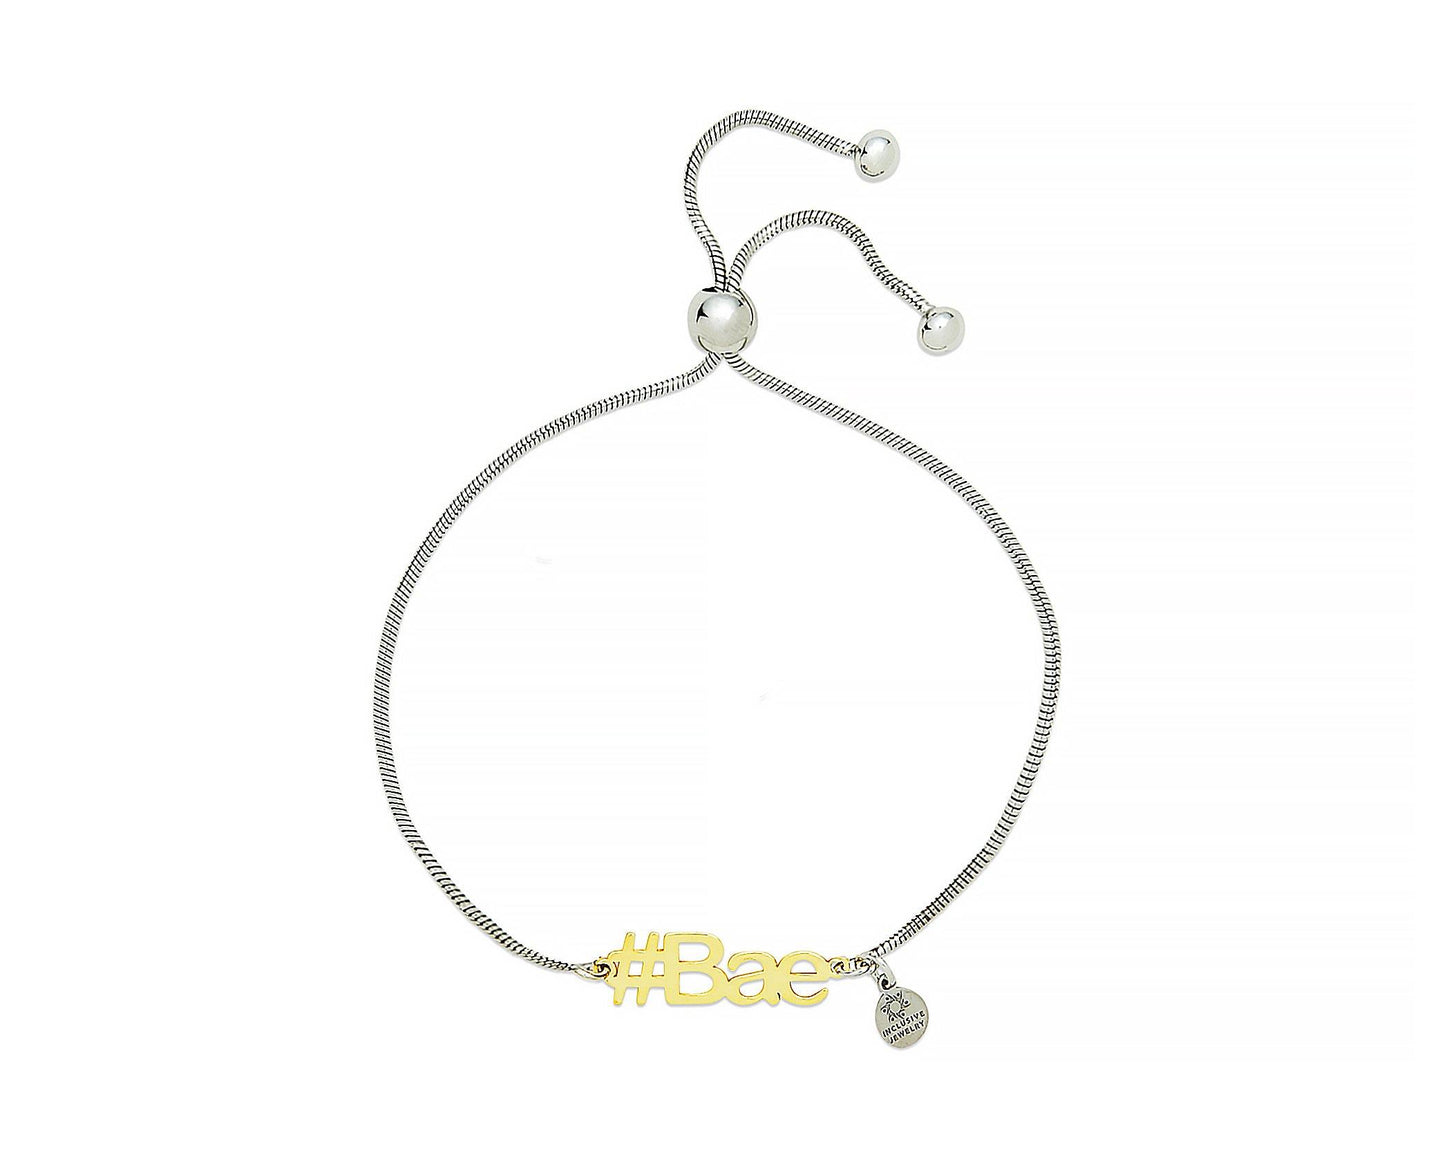 Bae Hashtag Bracelet - InclusiveJewelry